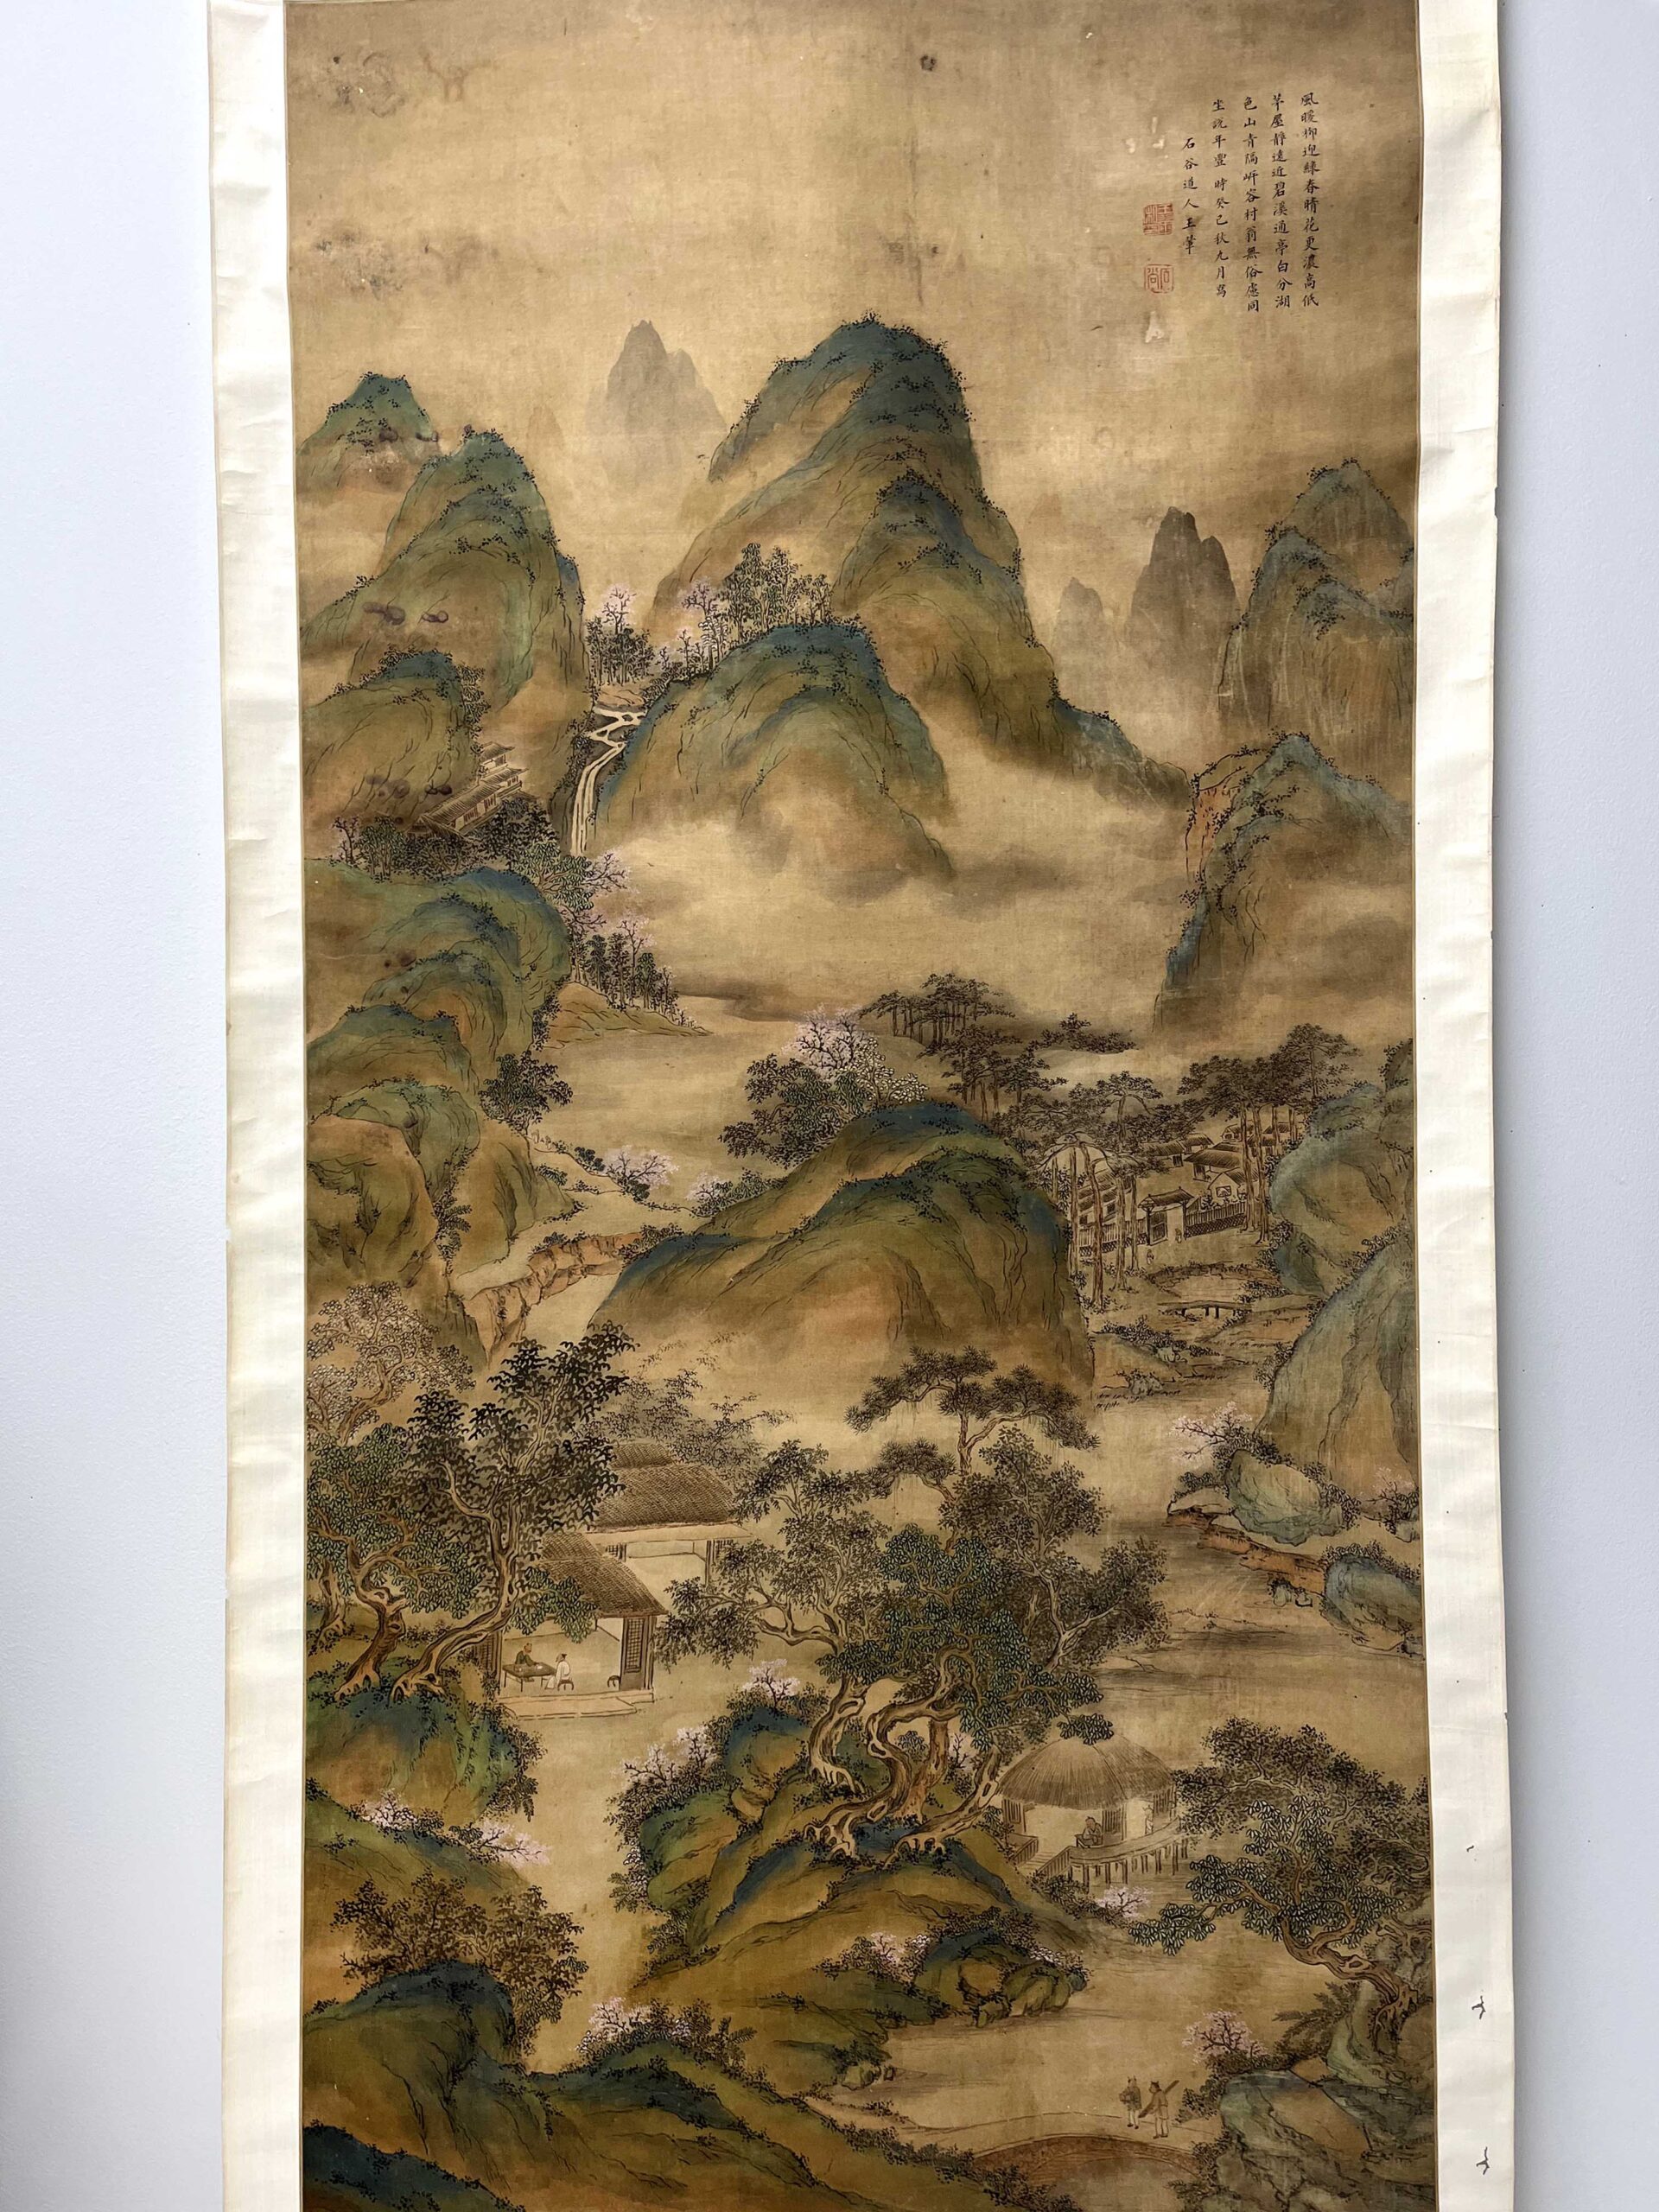 Landscape Painting by Wang Shigu of Early Qing Dynasty青绿山水天 